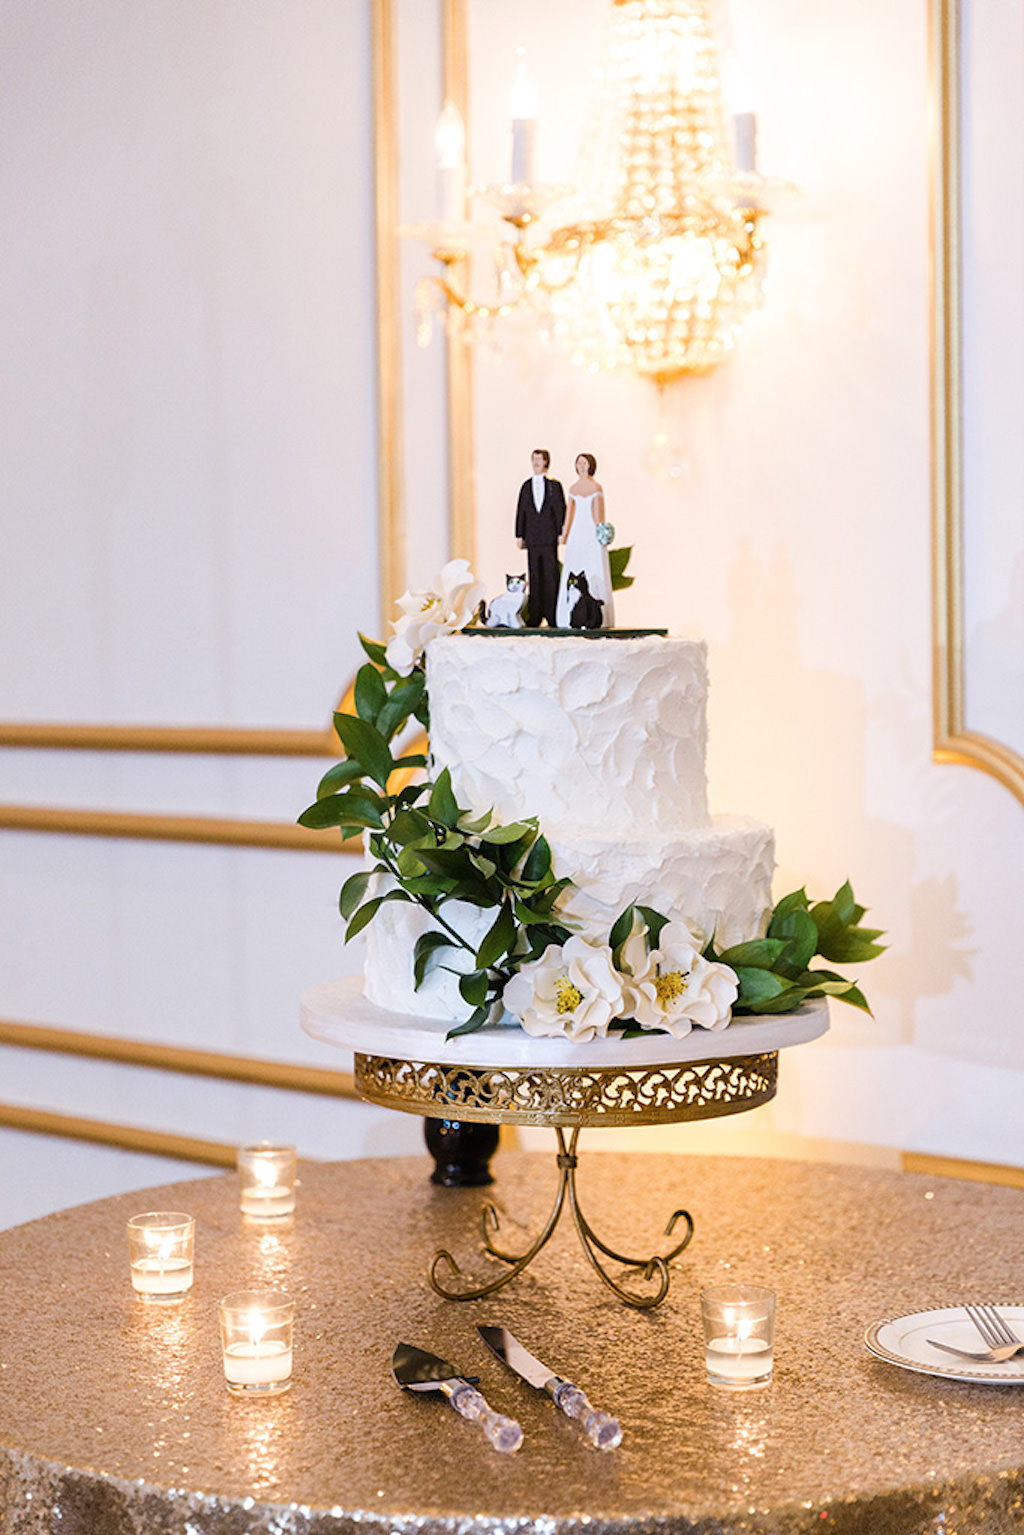 Elegant, White Two-tier textured Buttercream Wedding Cake with Edible Sugar Flower and Greenery Accents, Custom Cake Topper with Pets, Gold Sequined Cake Table cloth | Tampa Bay Wedding Cake Artists Alessi Bakery